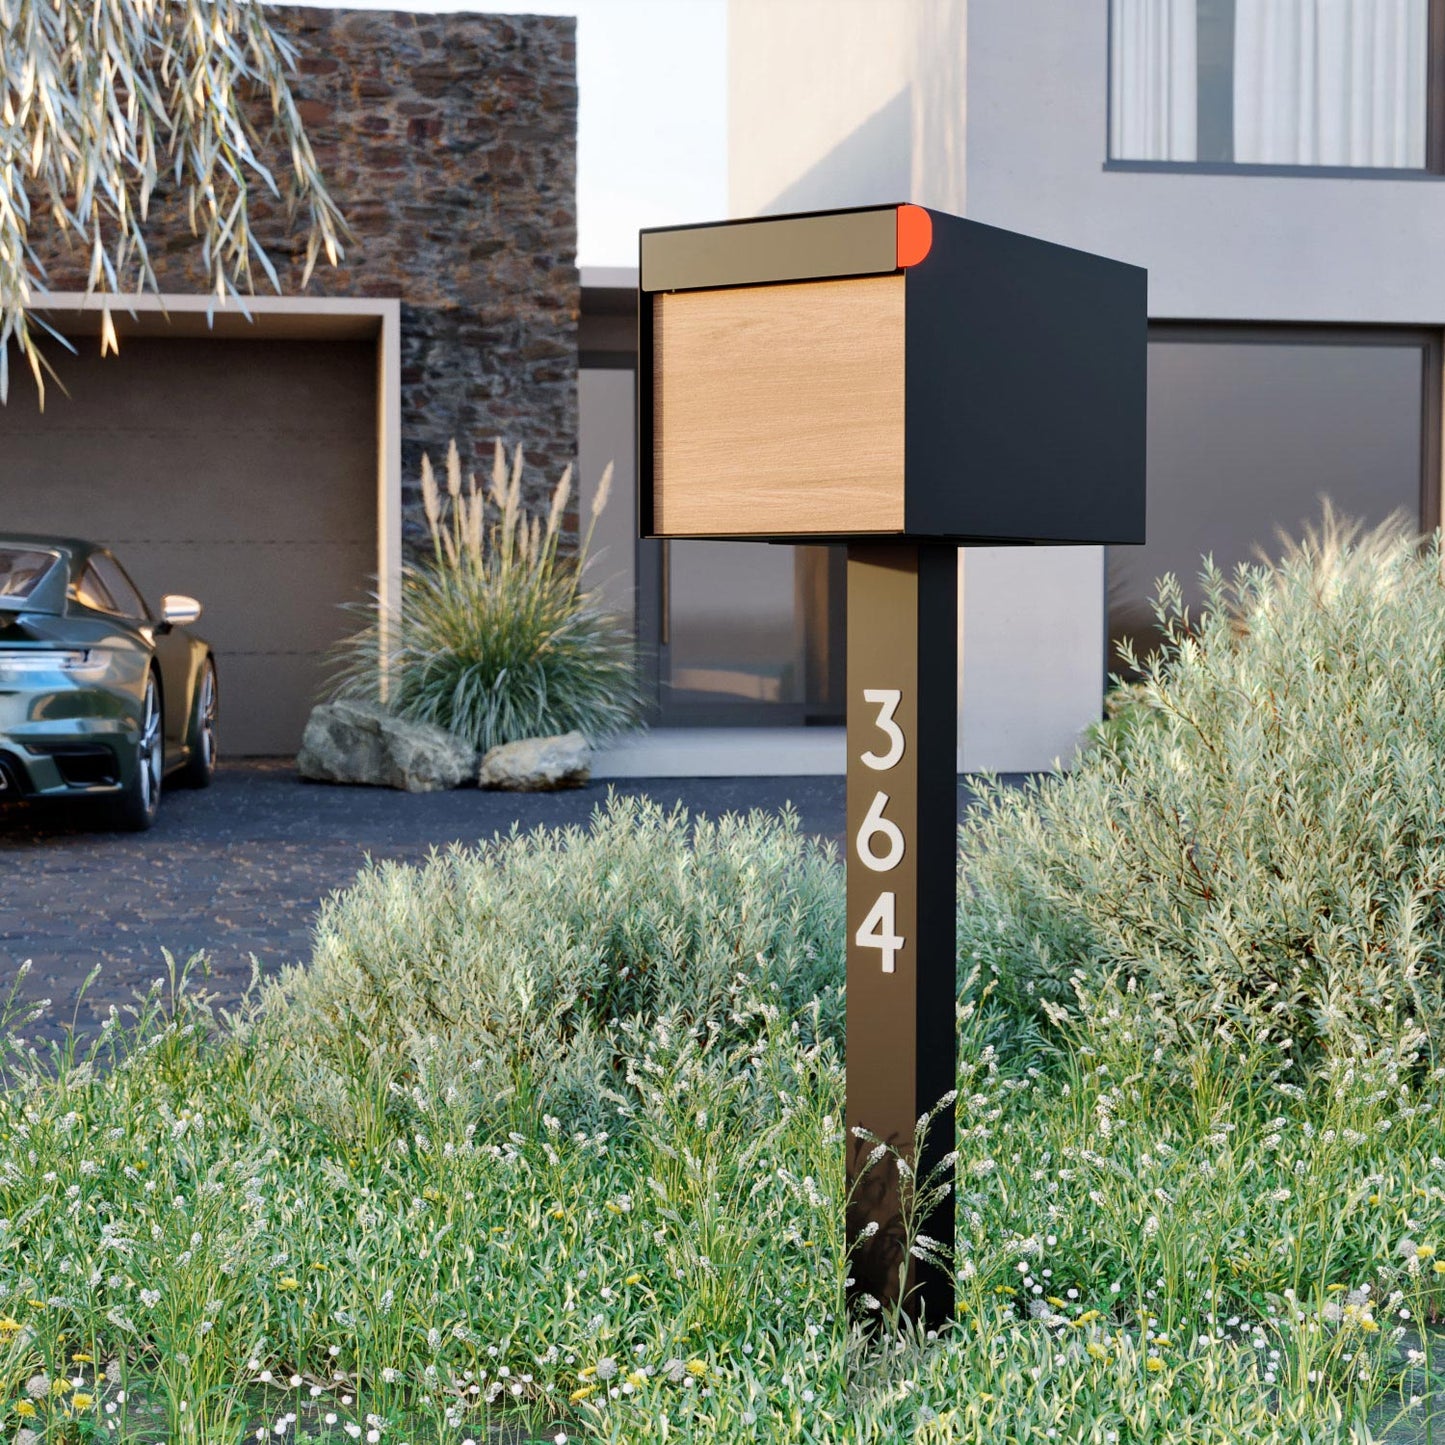 Town Square Mailbox by Bravios - Large Capacity Mailbox (Without Post) - Black with Voyager Wood Panel